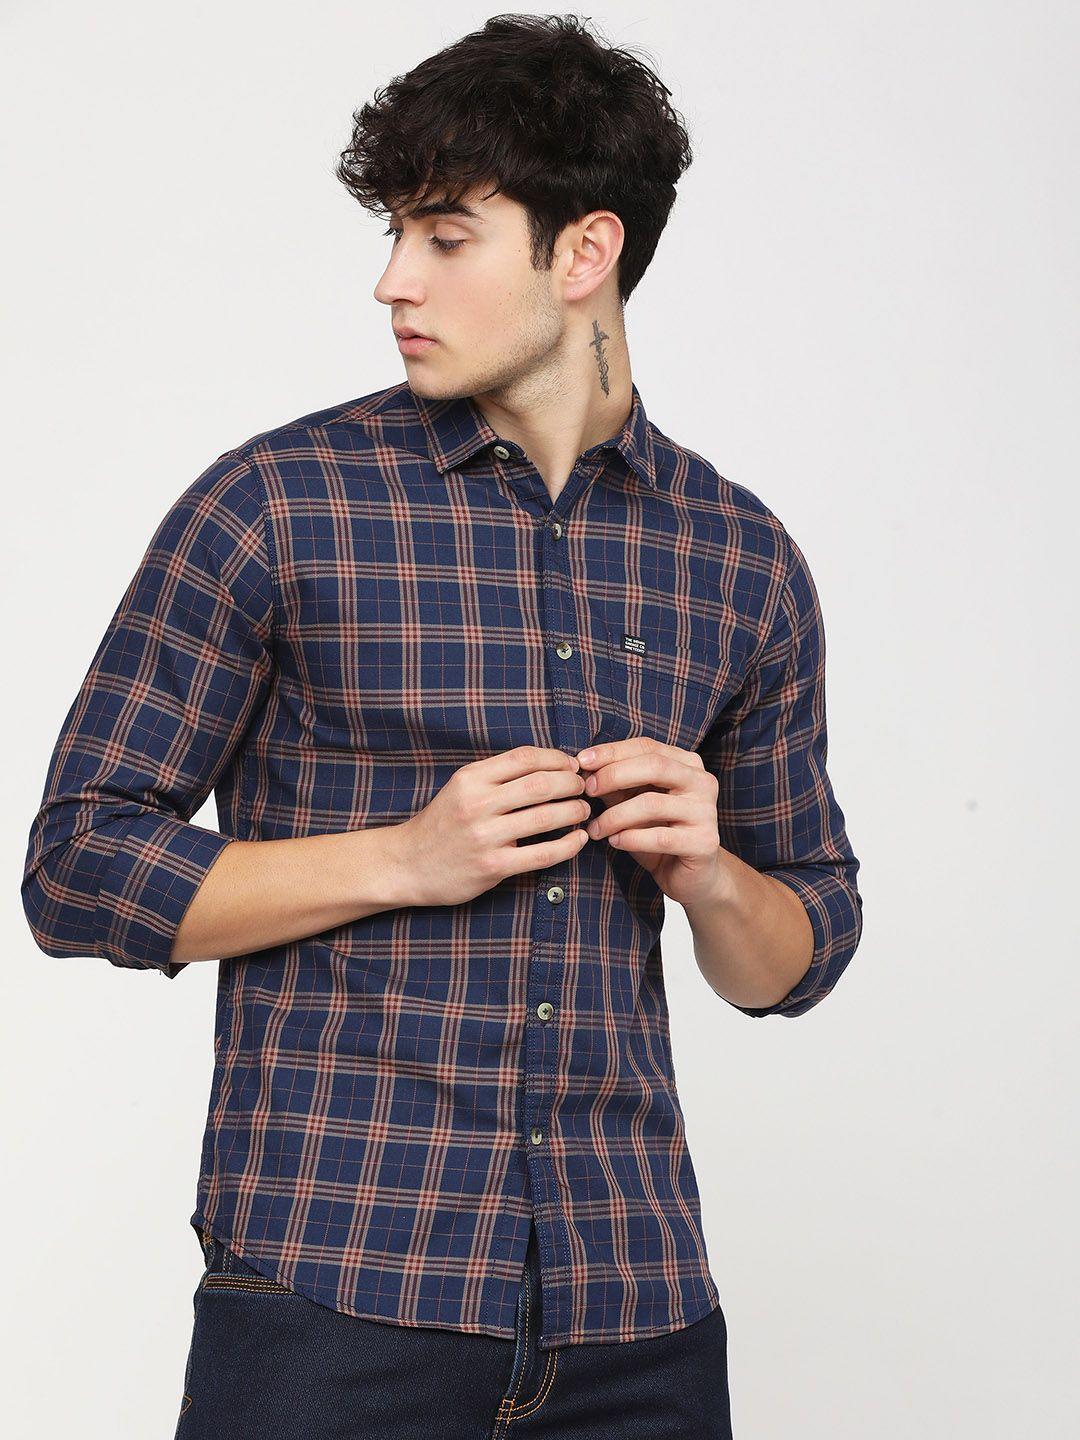 the-indian-garage-co-men-navy-blue--maroon-slim-fit-checked-shirt